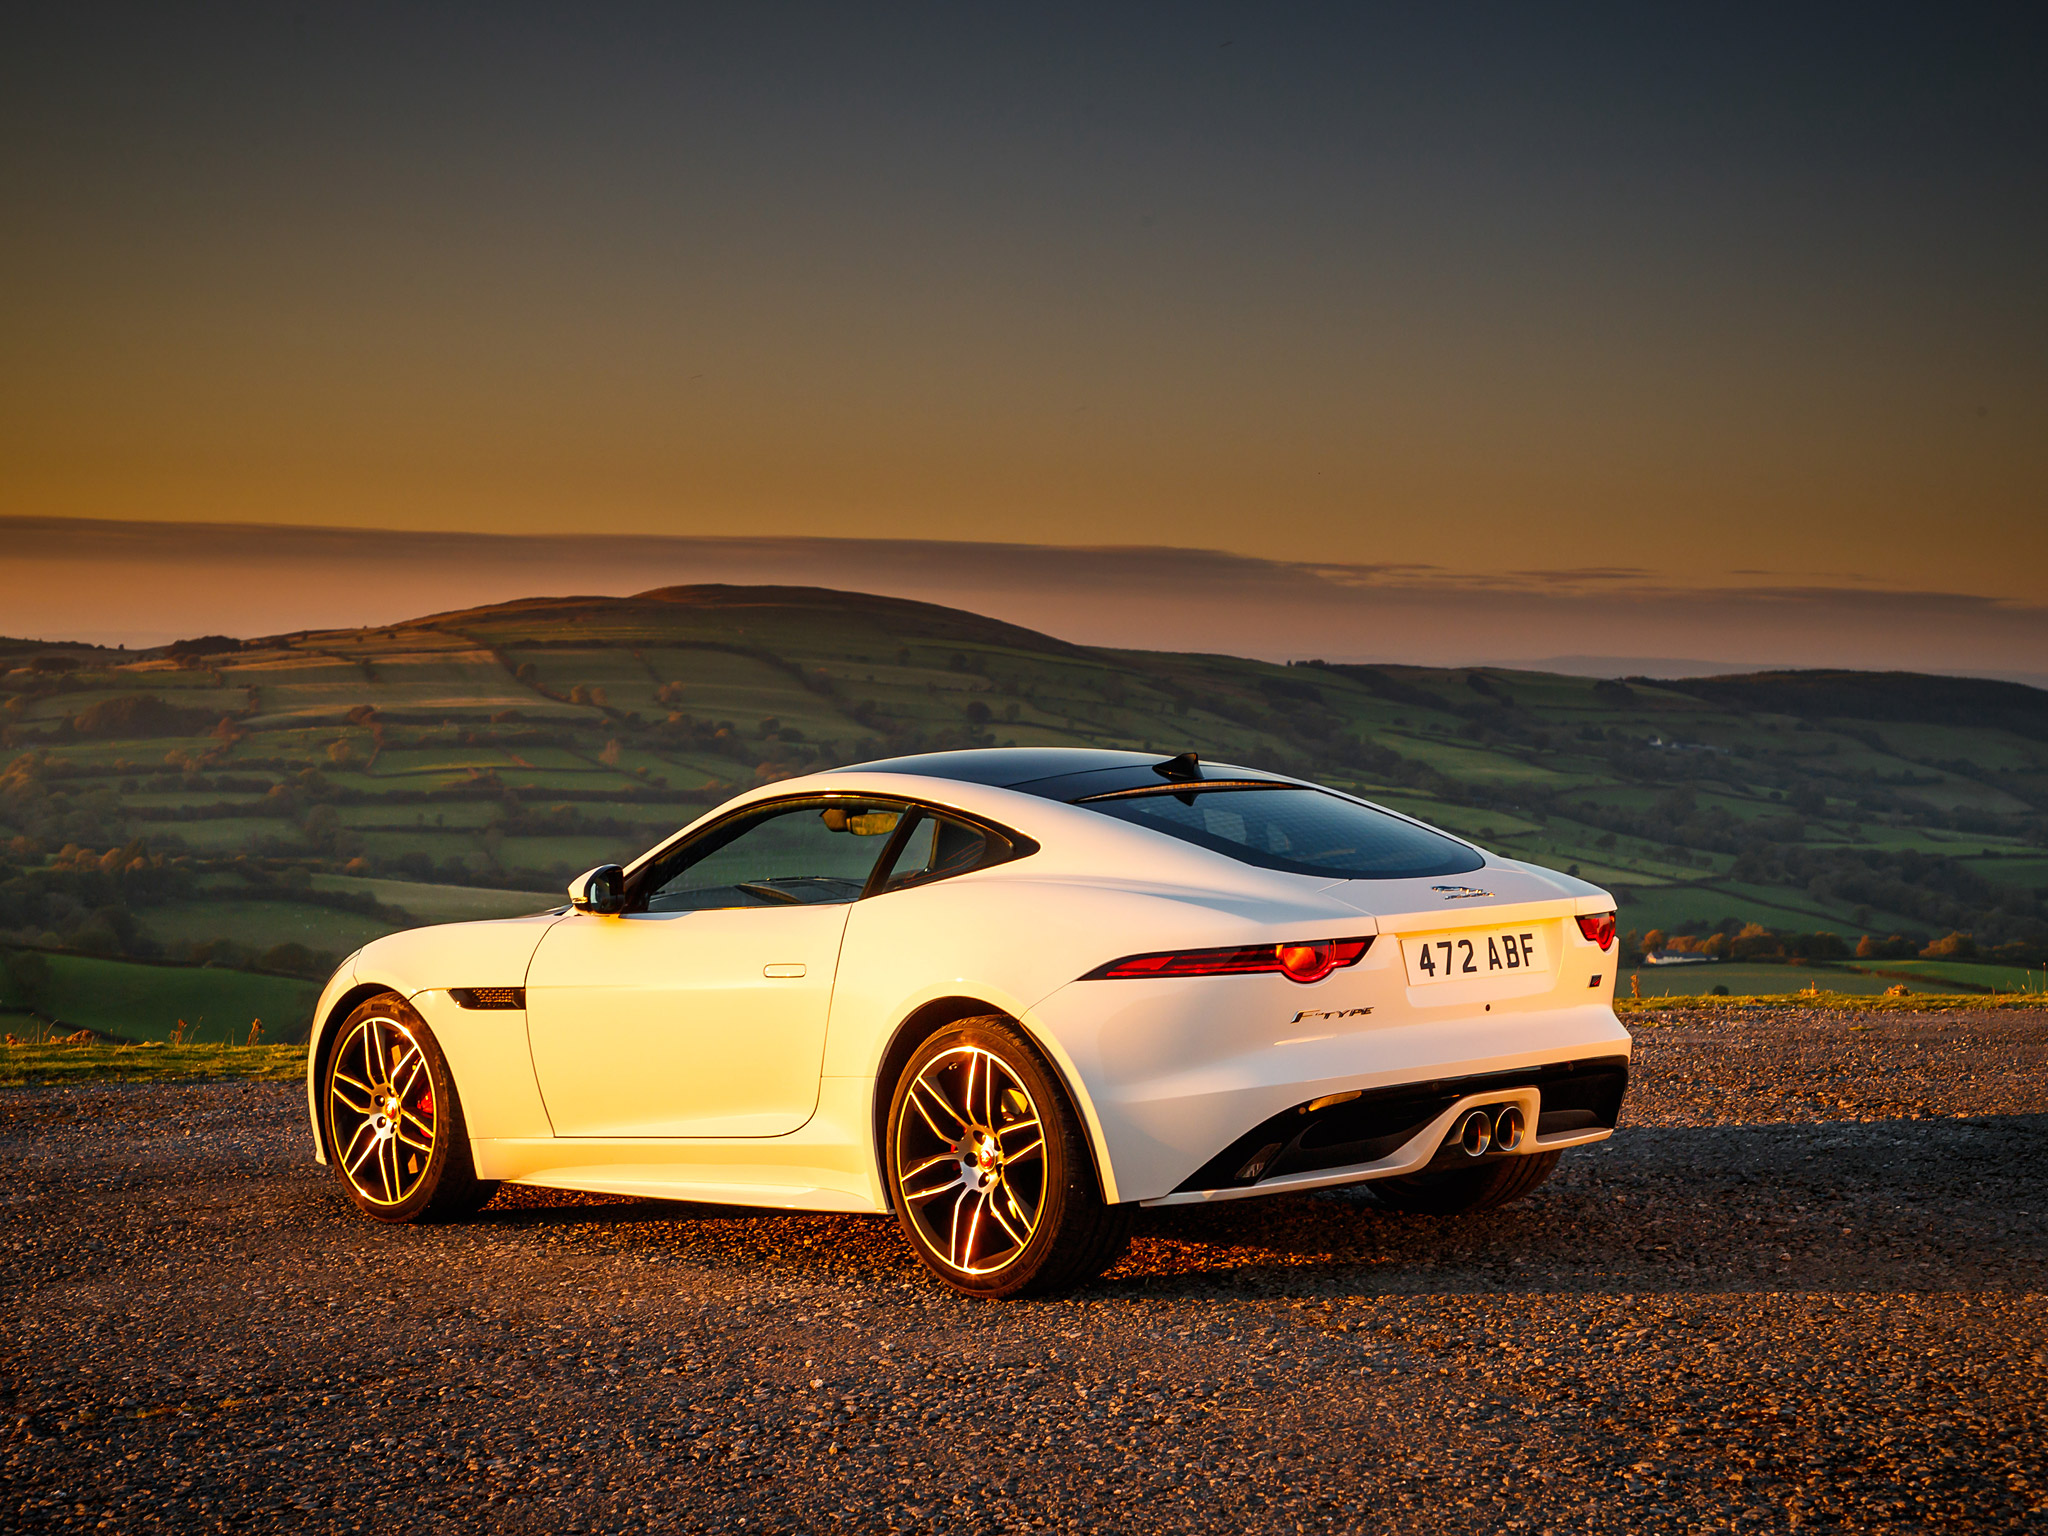  2019 Jaguar F-Type Chequered Flag Edition Wallpaper.